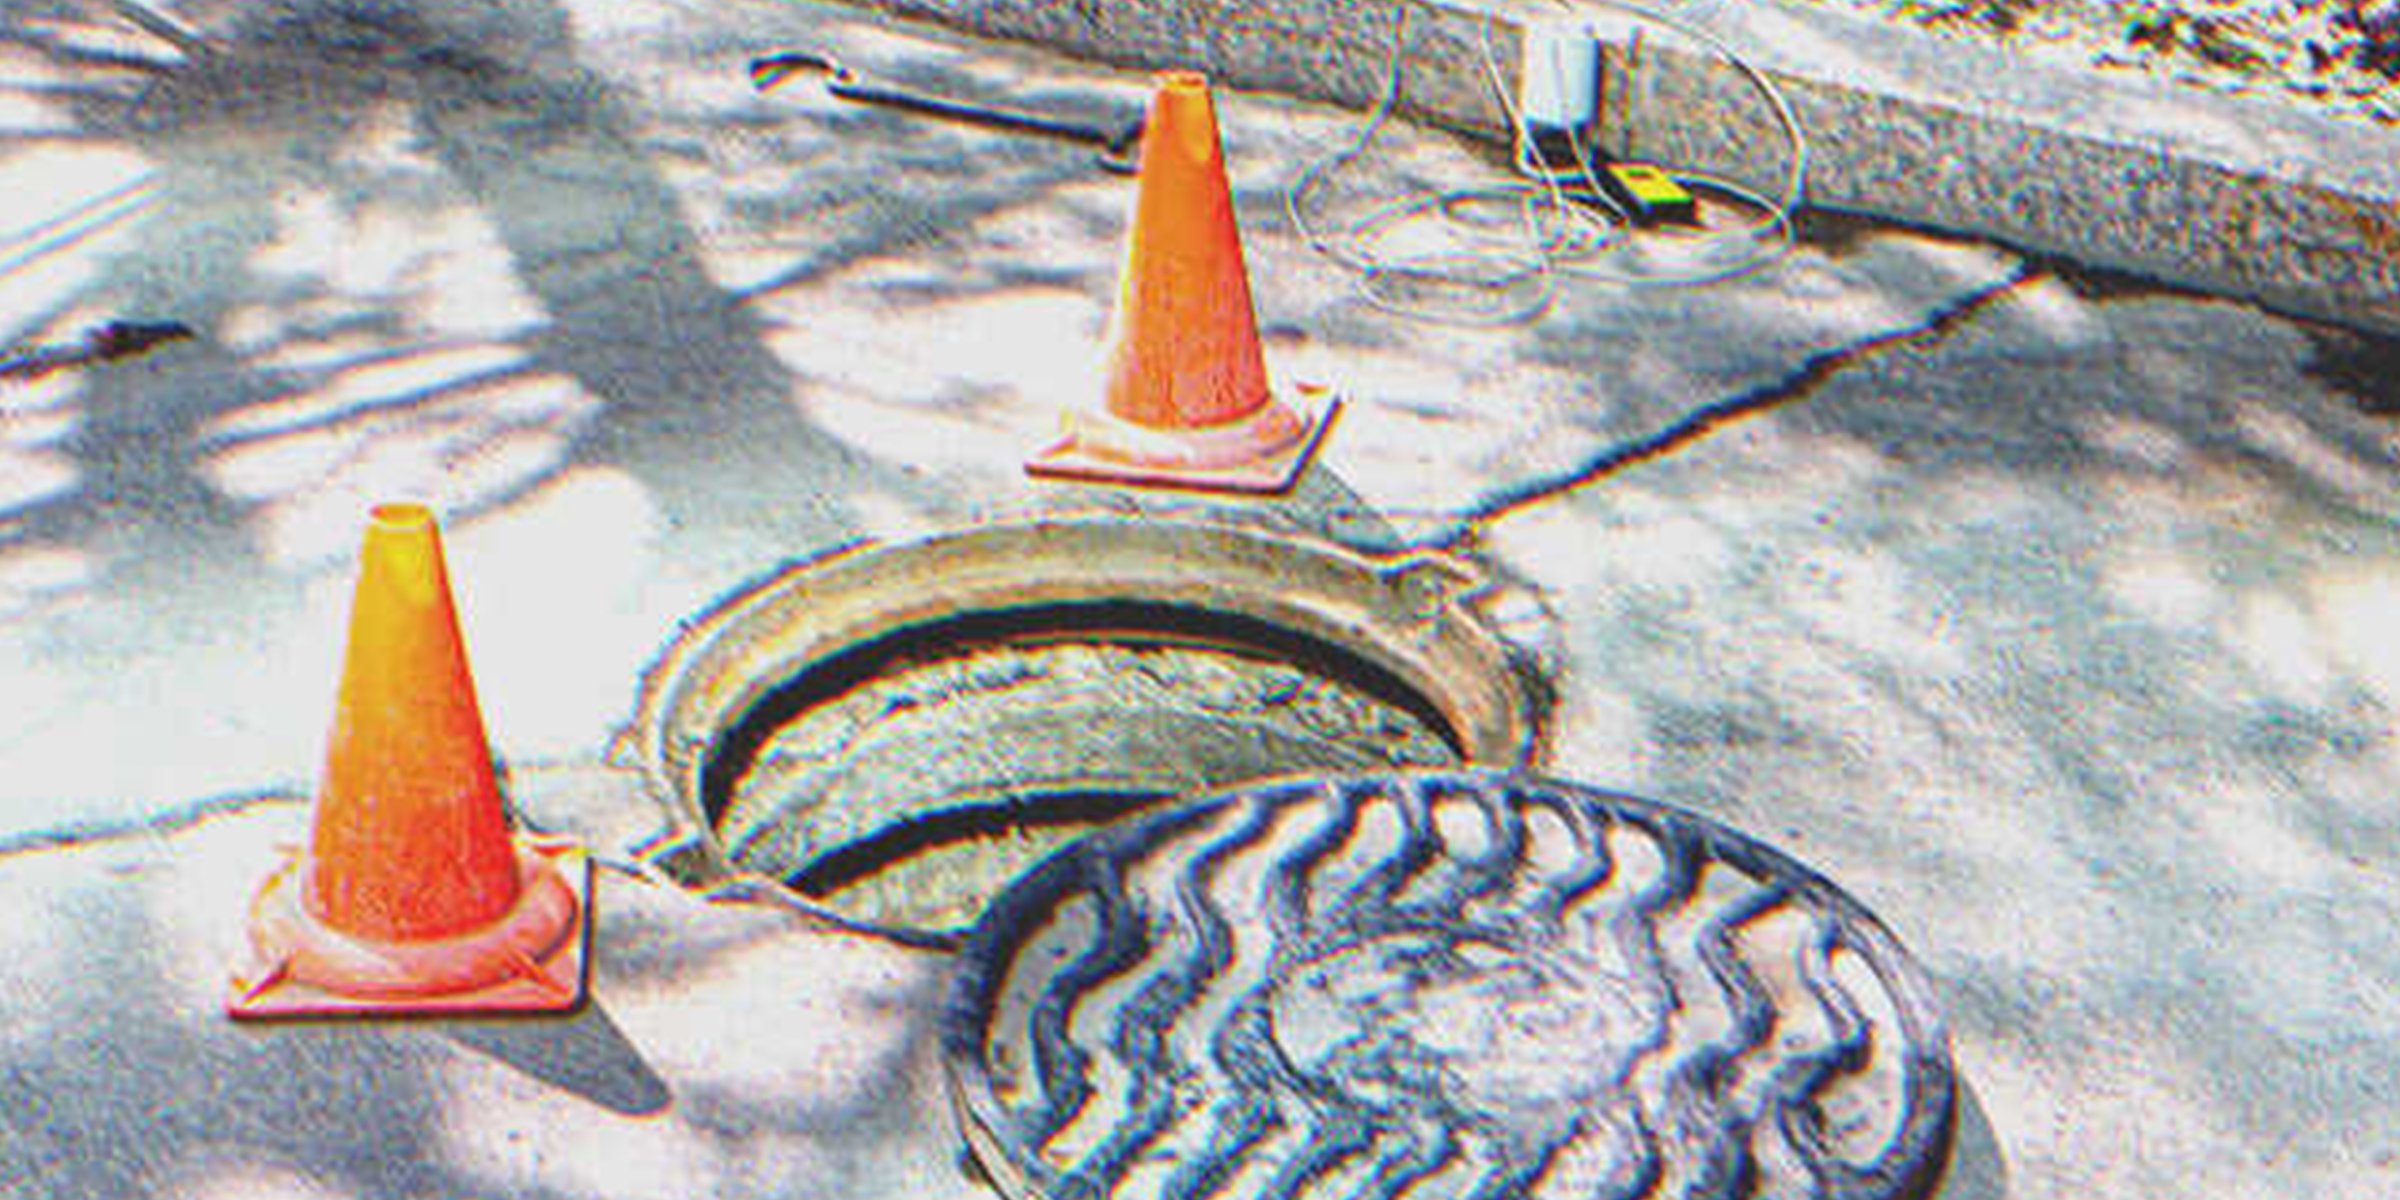 The noise was coming from a manhole. | Source: Shutterstock